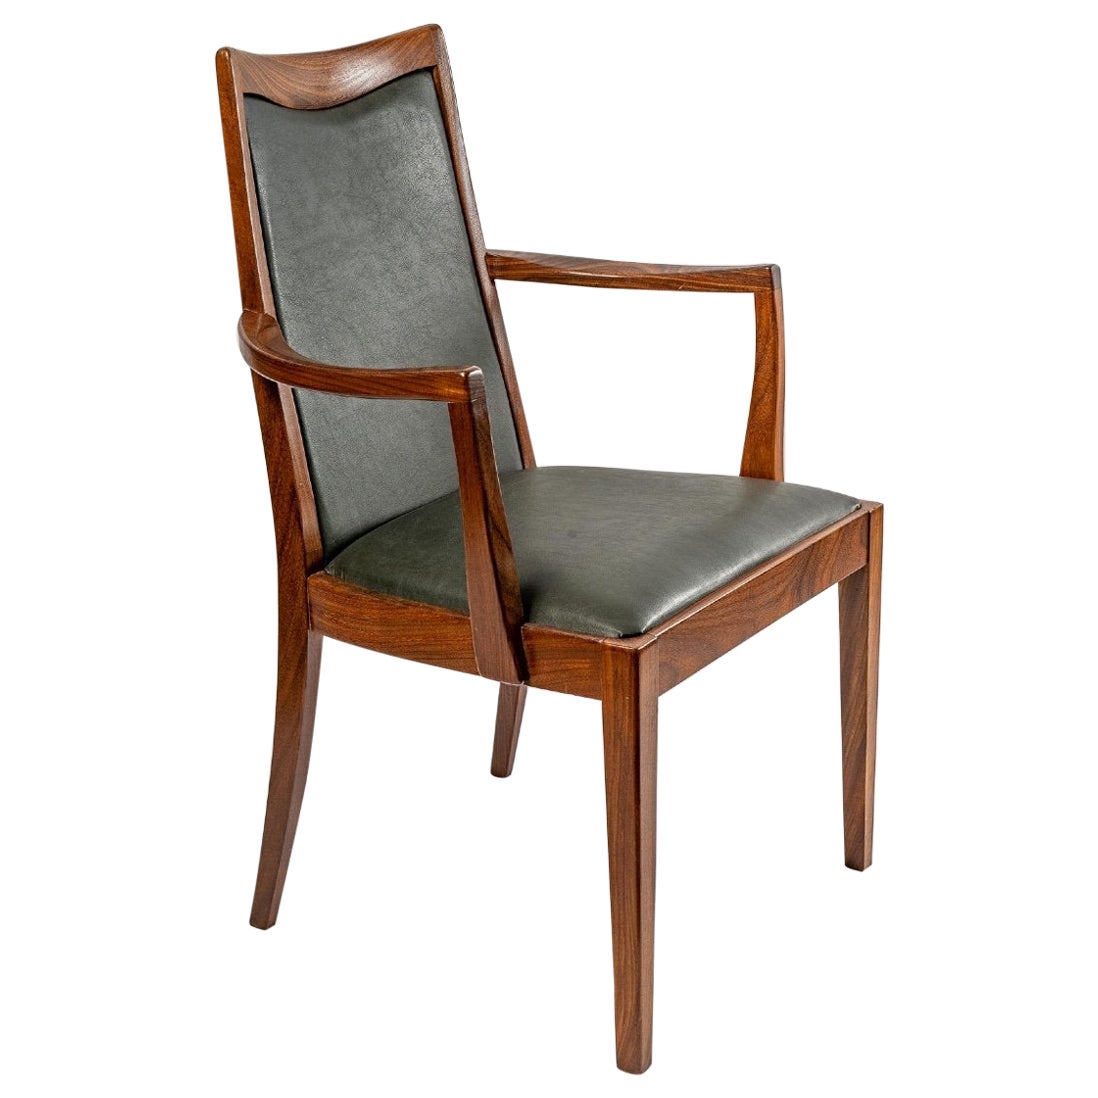 Two Armchairs, Rio Rosewood and Leather, Stamped G-Plan, 20th Century For Sale